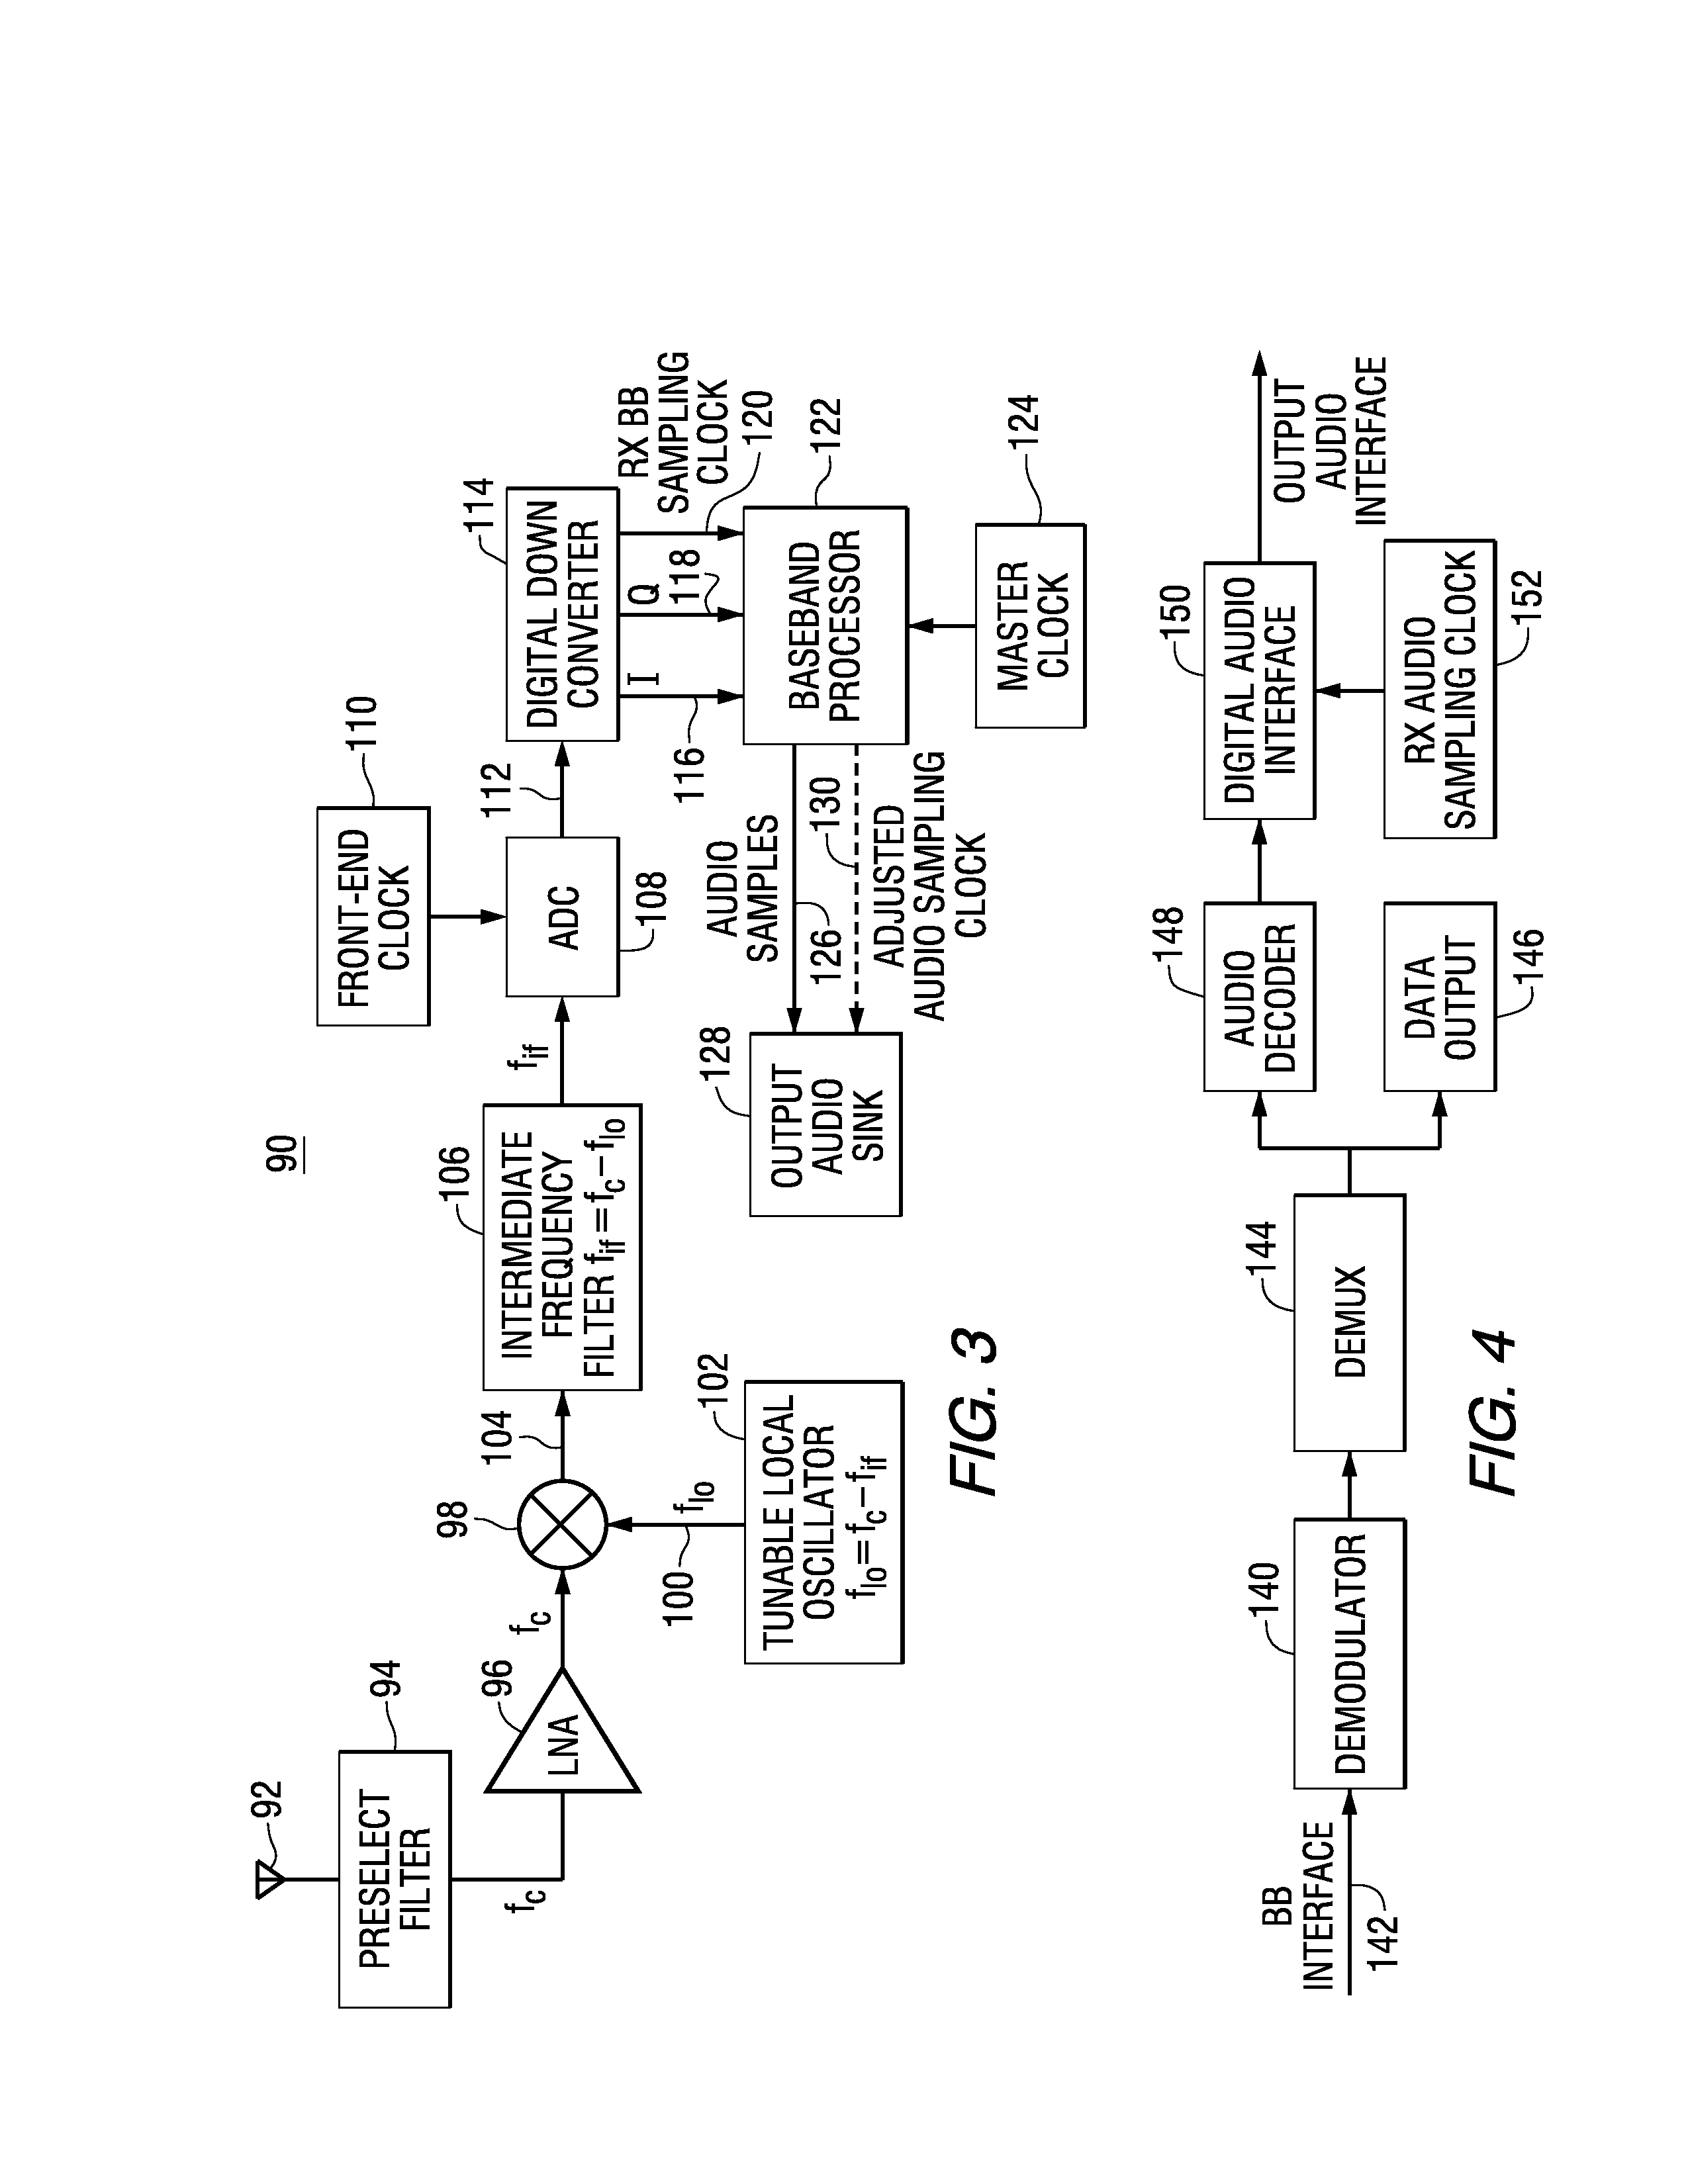 System and method for synchronous processing of analog and digital pathways in a digital radio receiver